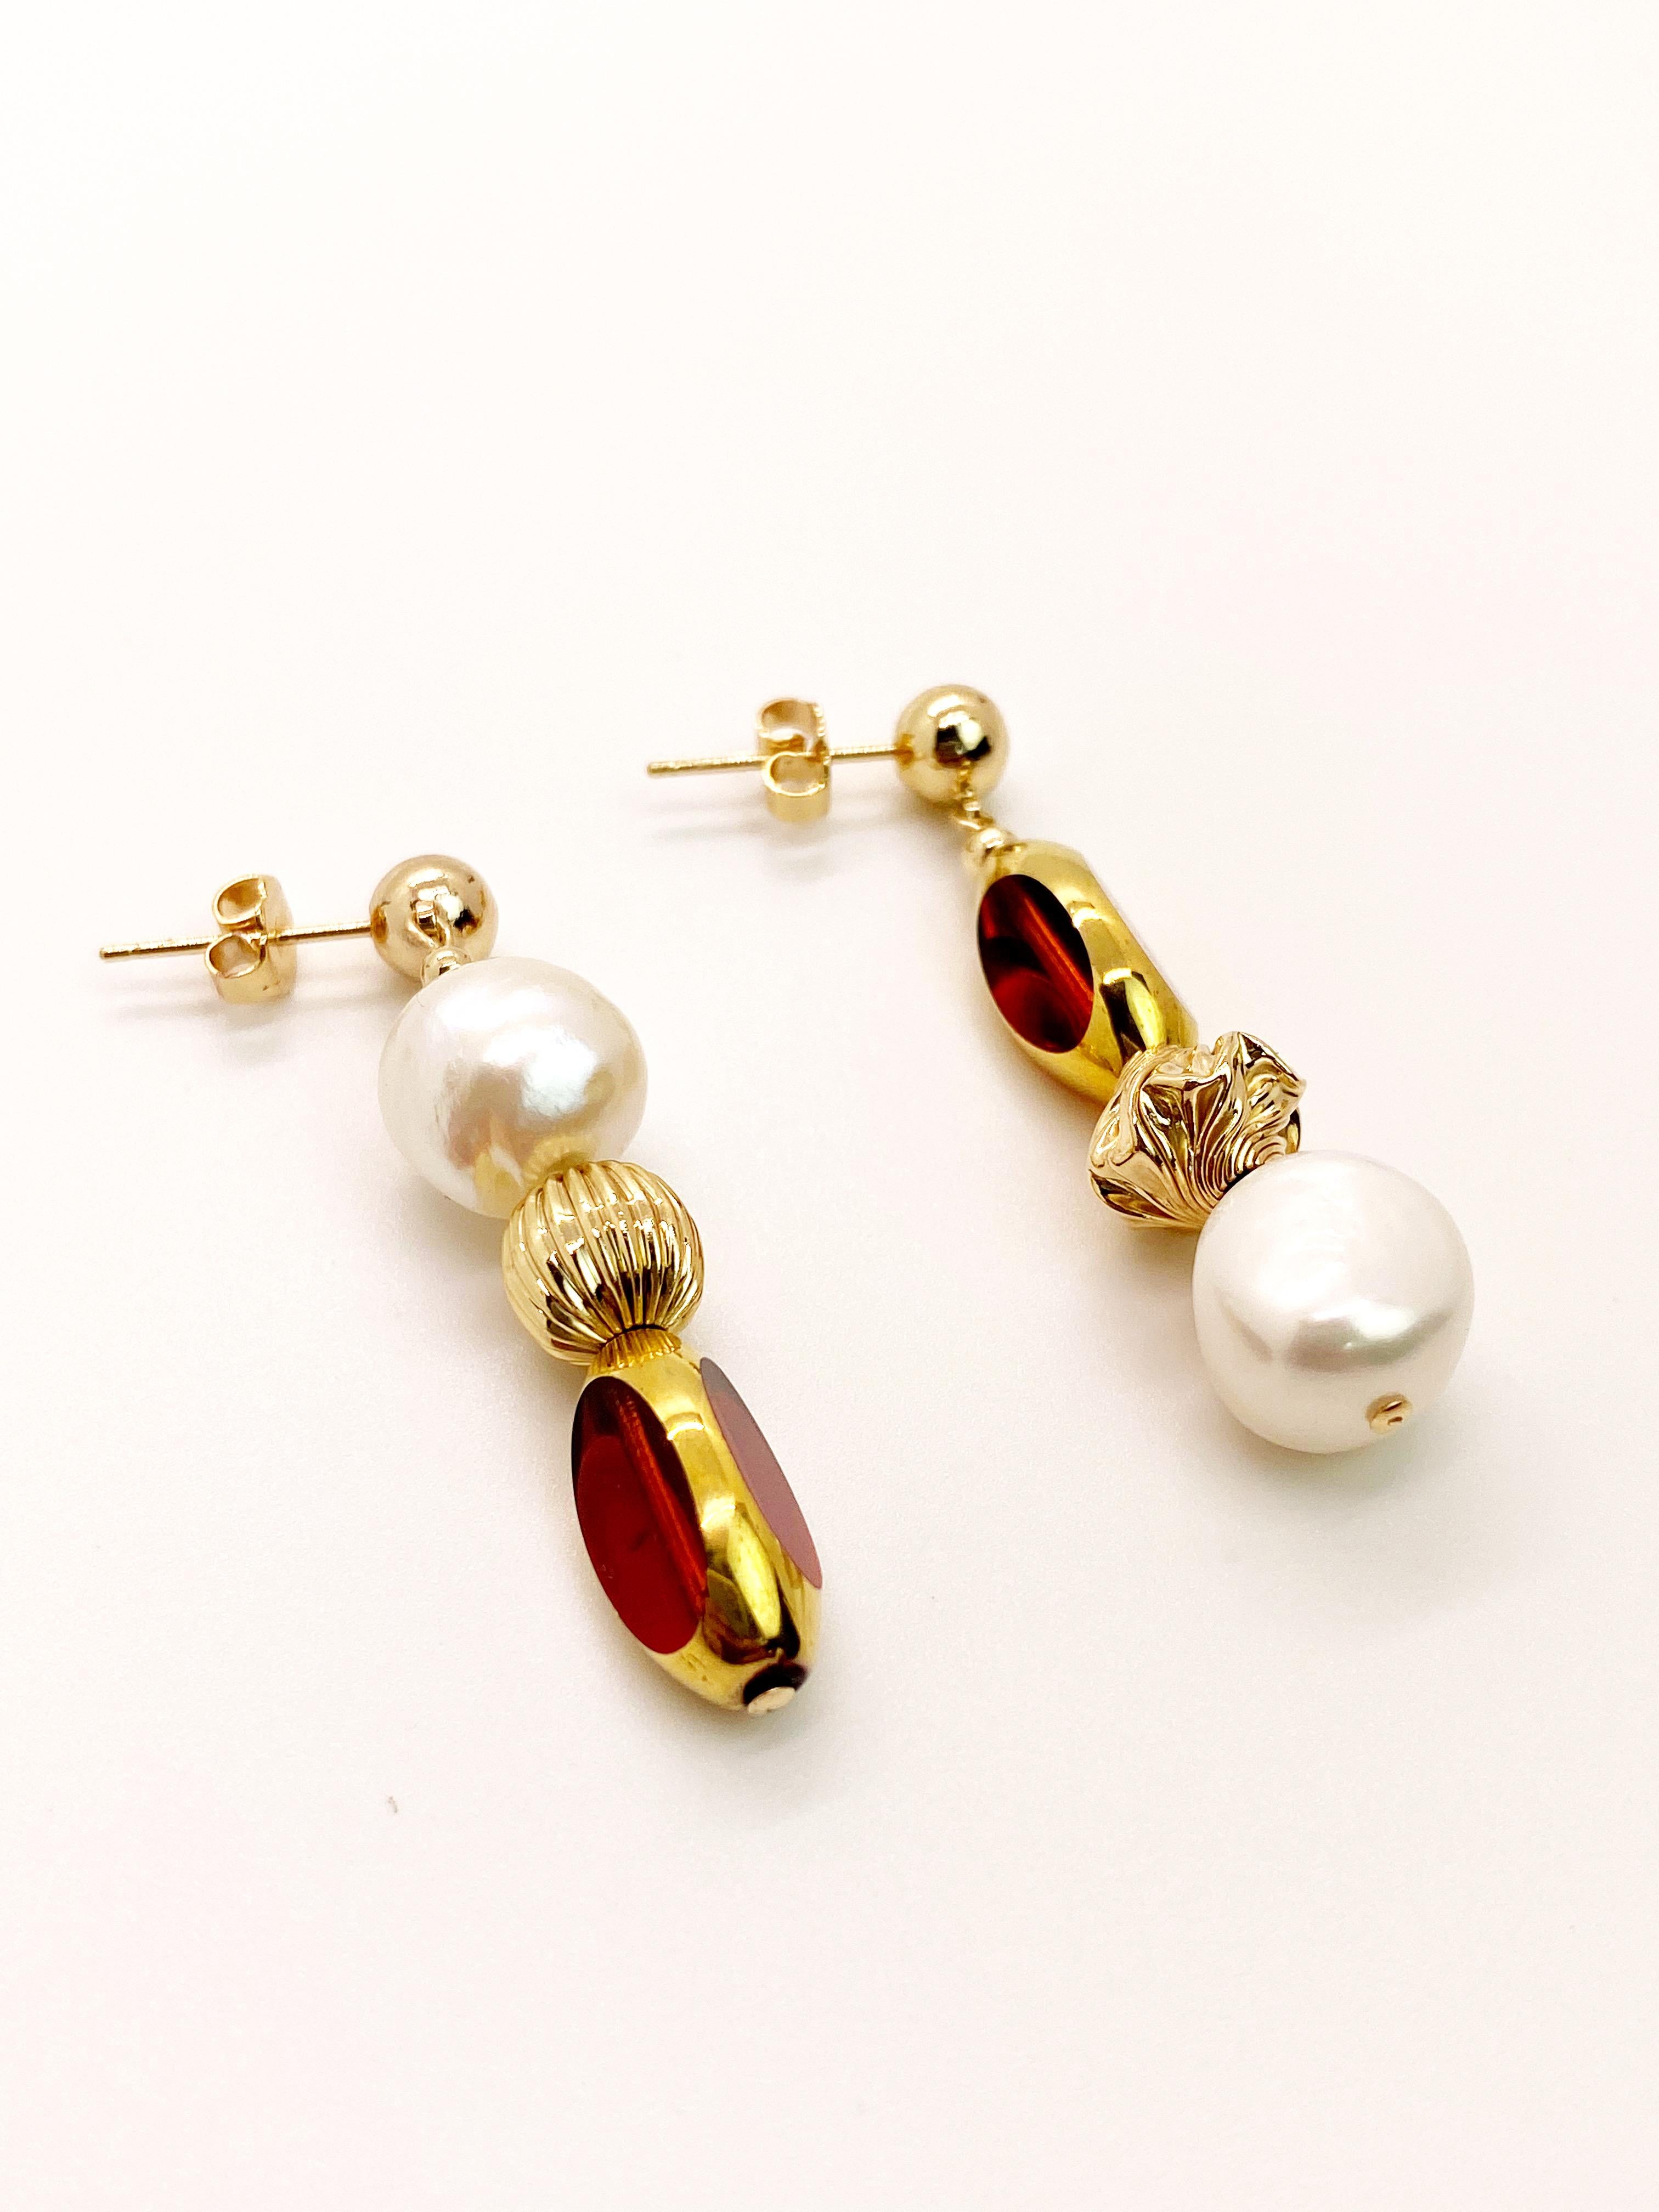 Amber Red colored vintage German window glass beads edged with 24K gold, freshwater pearls, gold filled textured beads on a 14K gold filled earring stud. Entire earring is about 1.8 inches. 

The vintage German glass beads are considered rare and